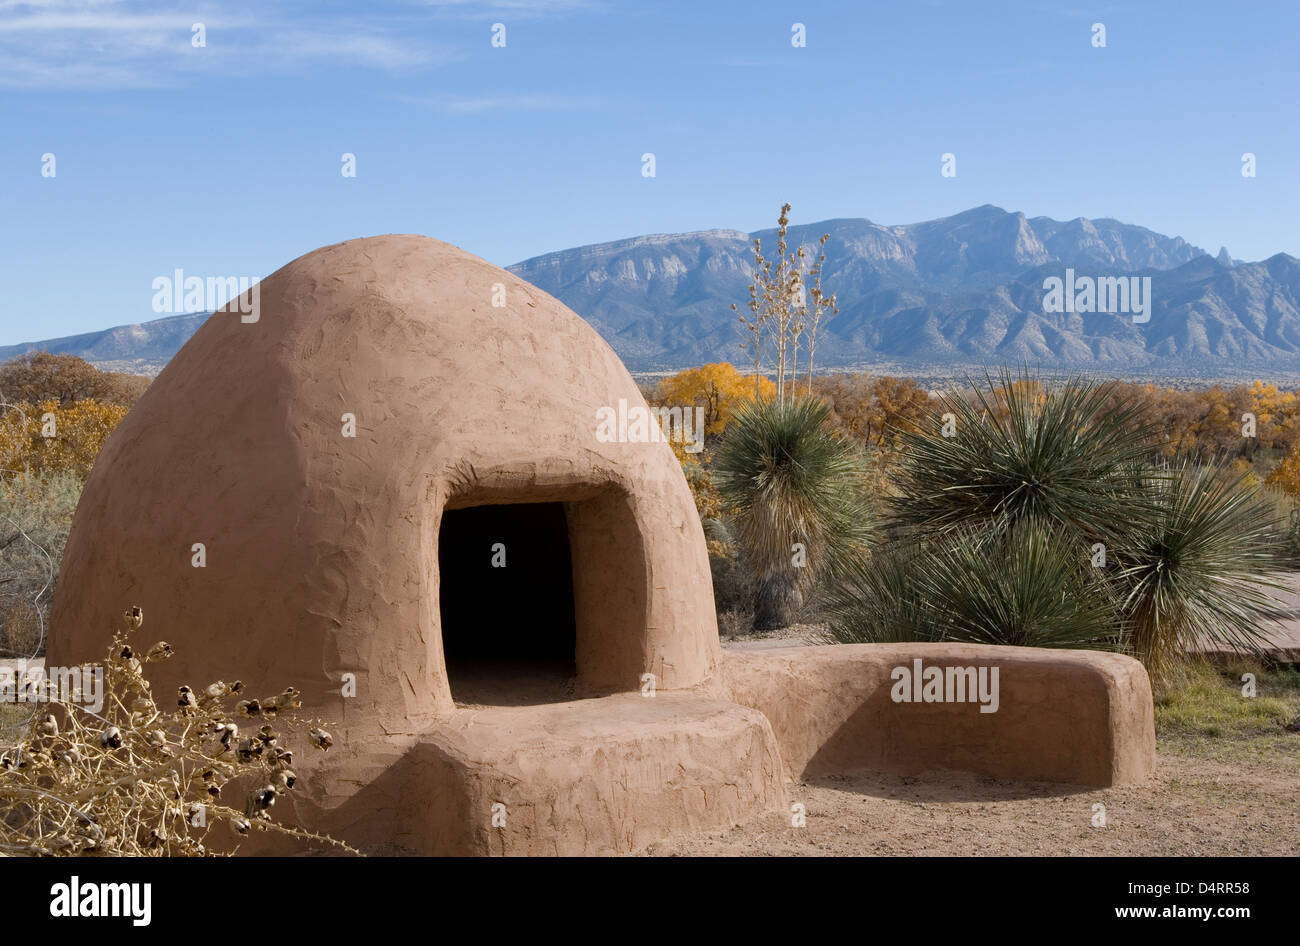 New Mexico: Horno traditional oven Stock Photo